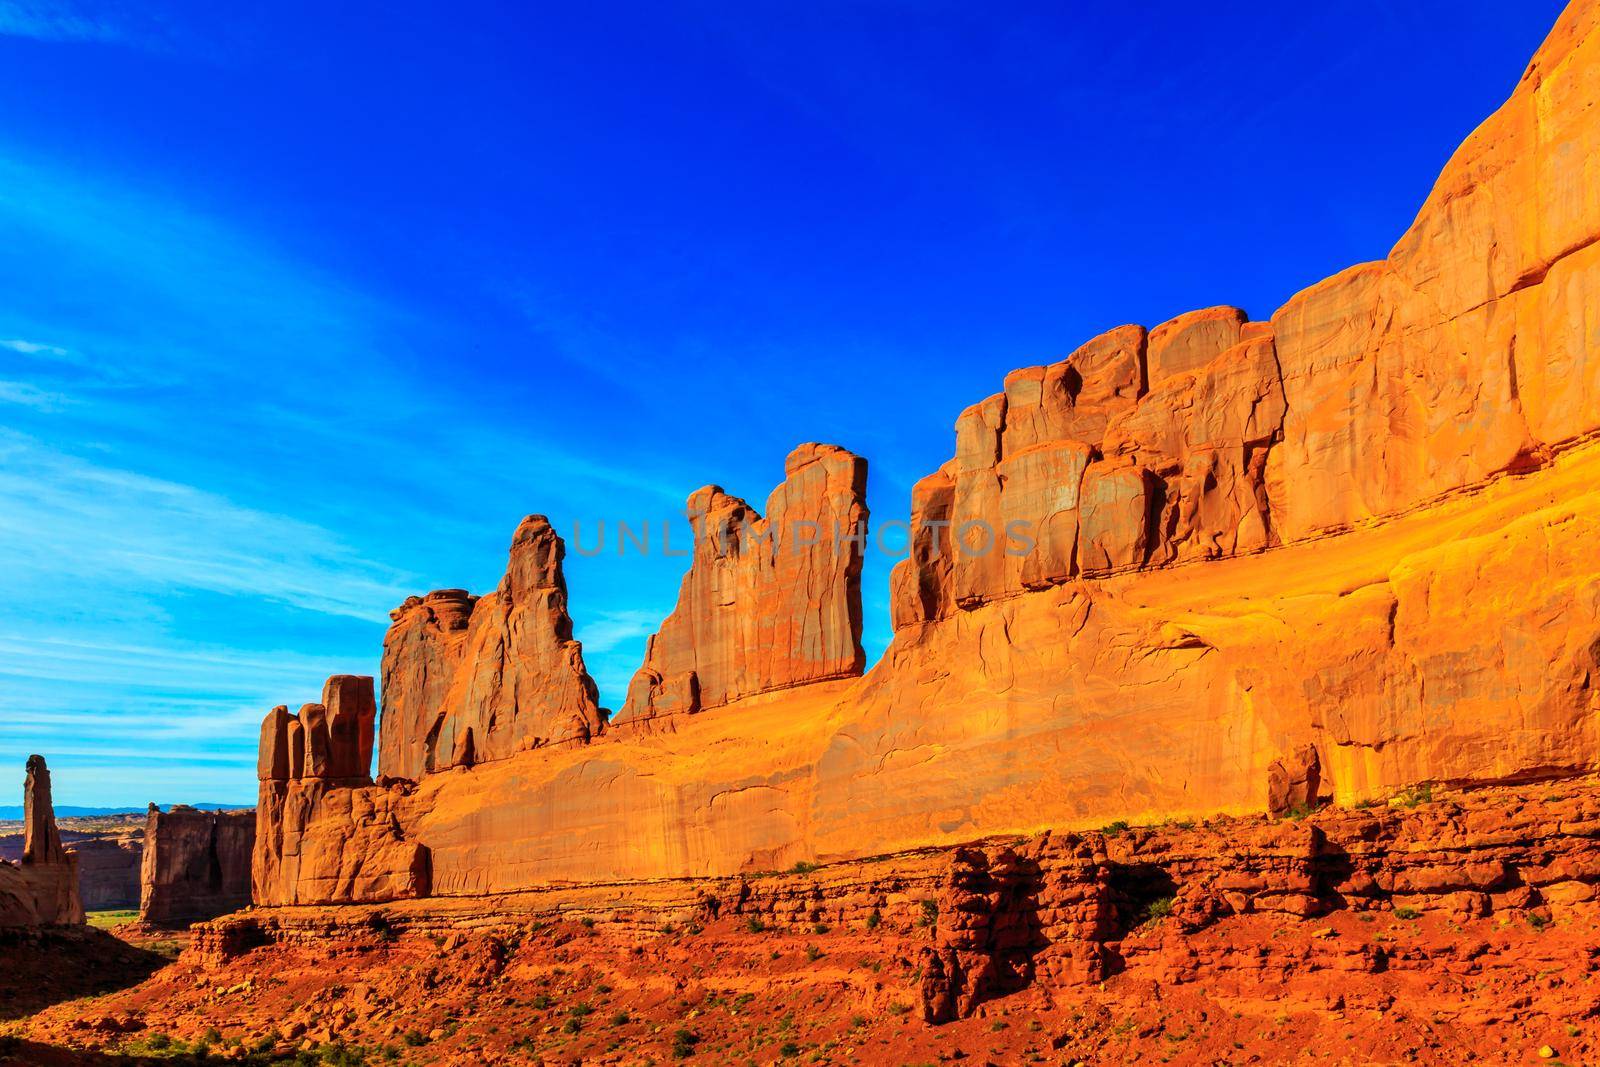 The famous Park Avenue formation in Arches National Park, Utah.